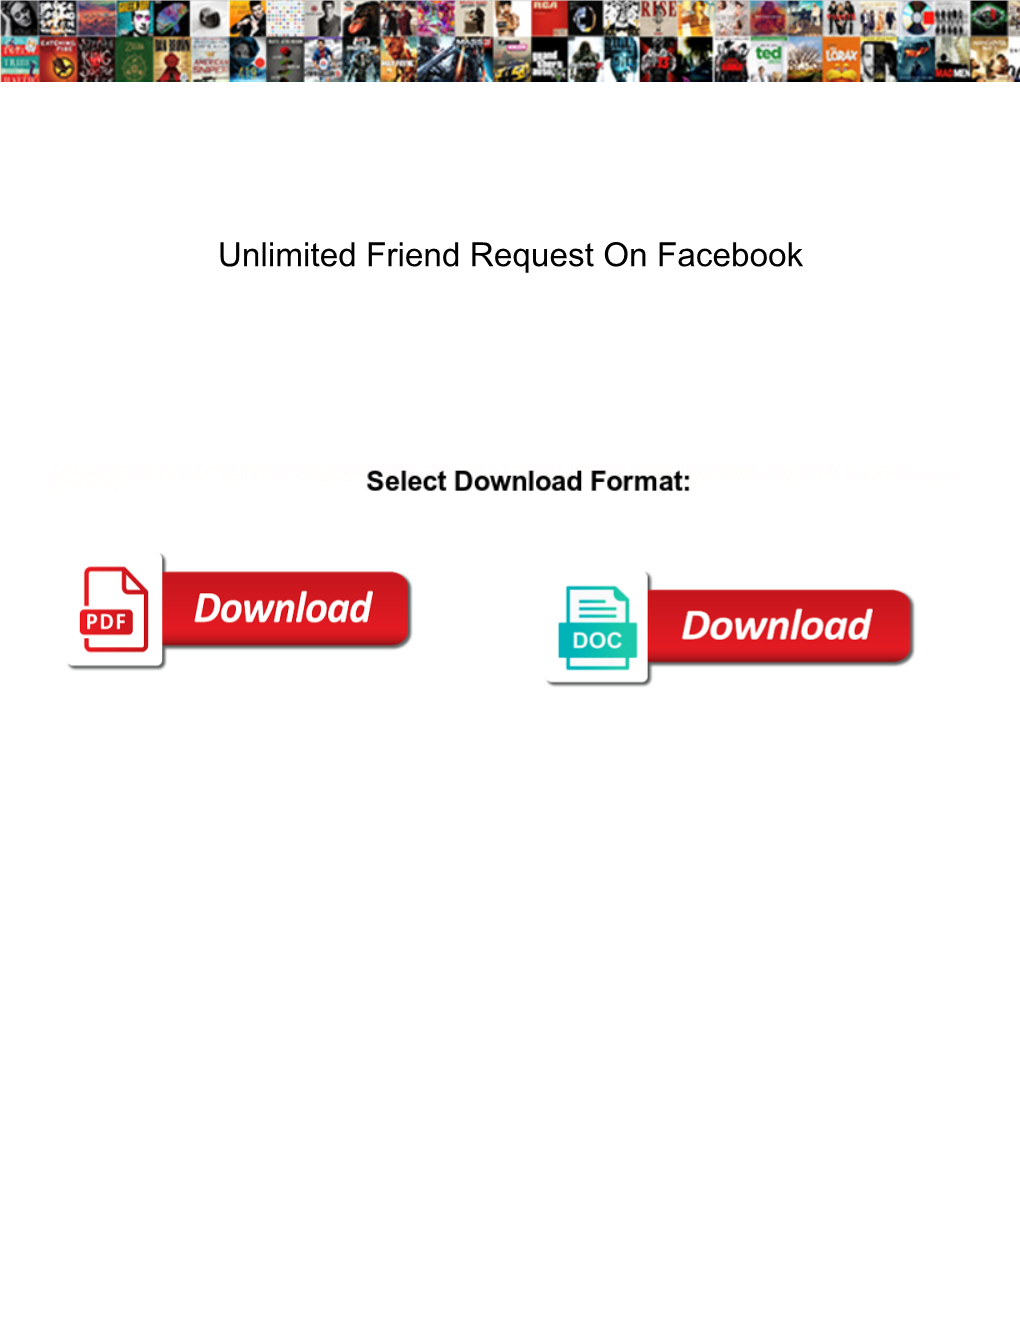 Unlimited Friend Request on Facebook